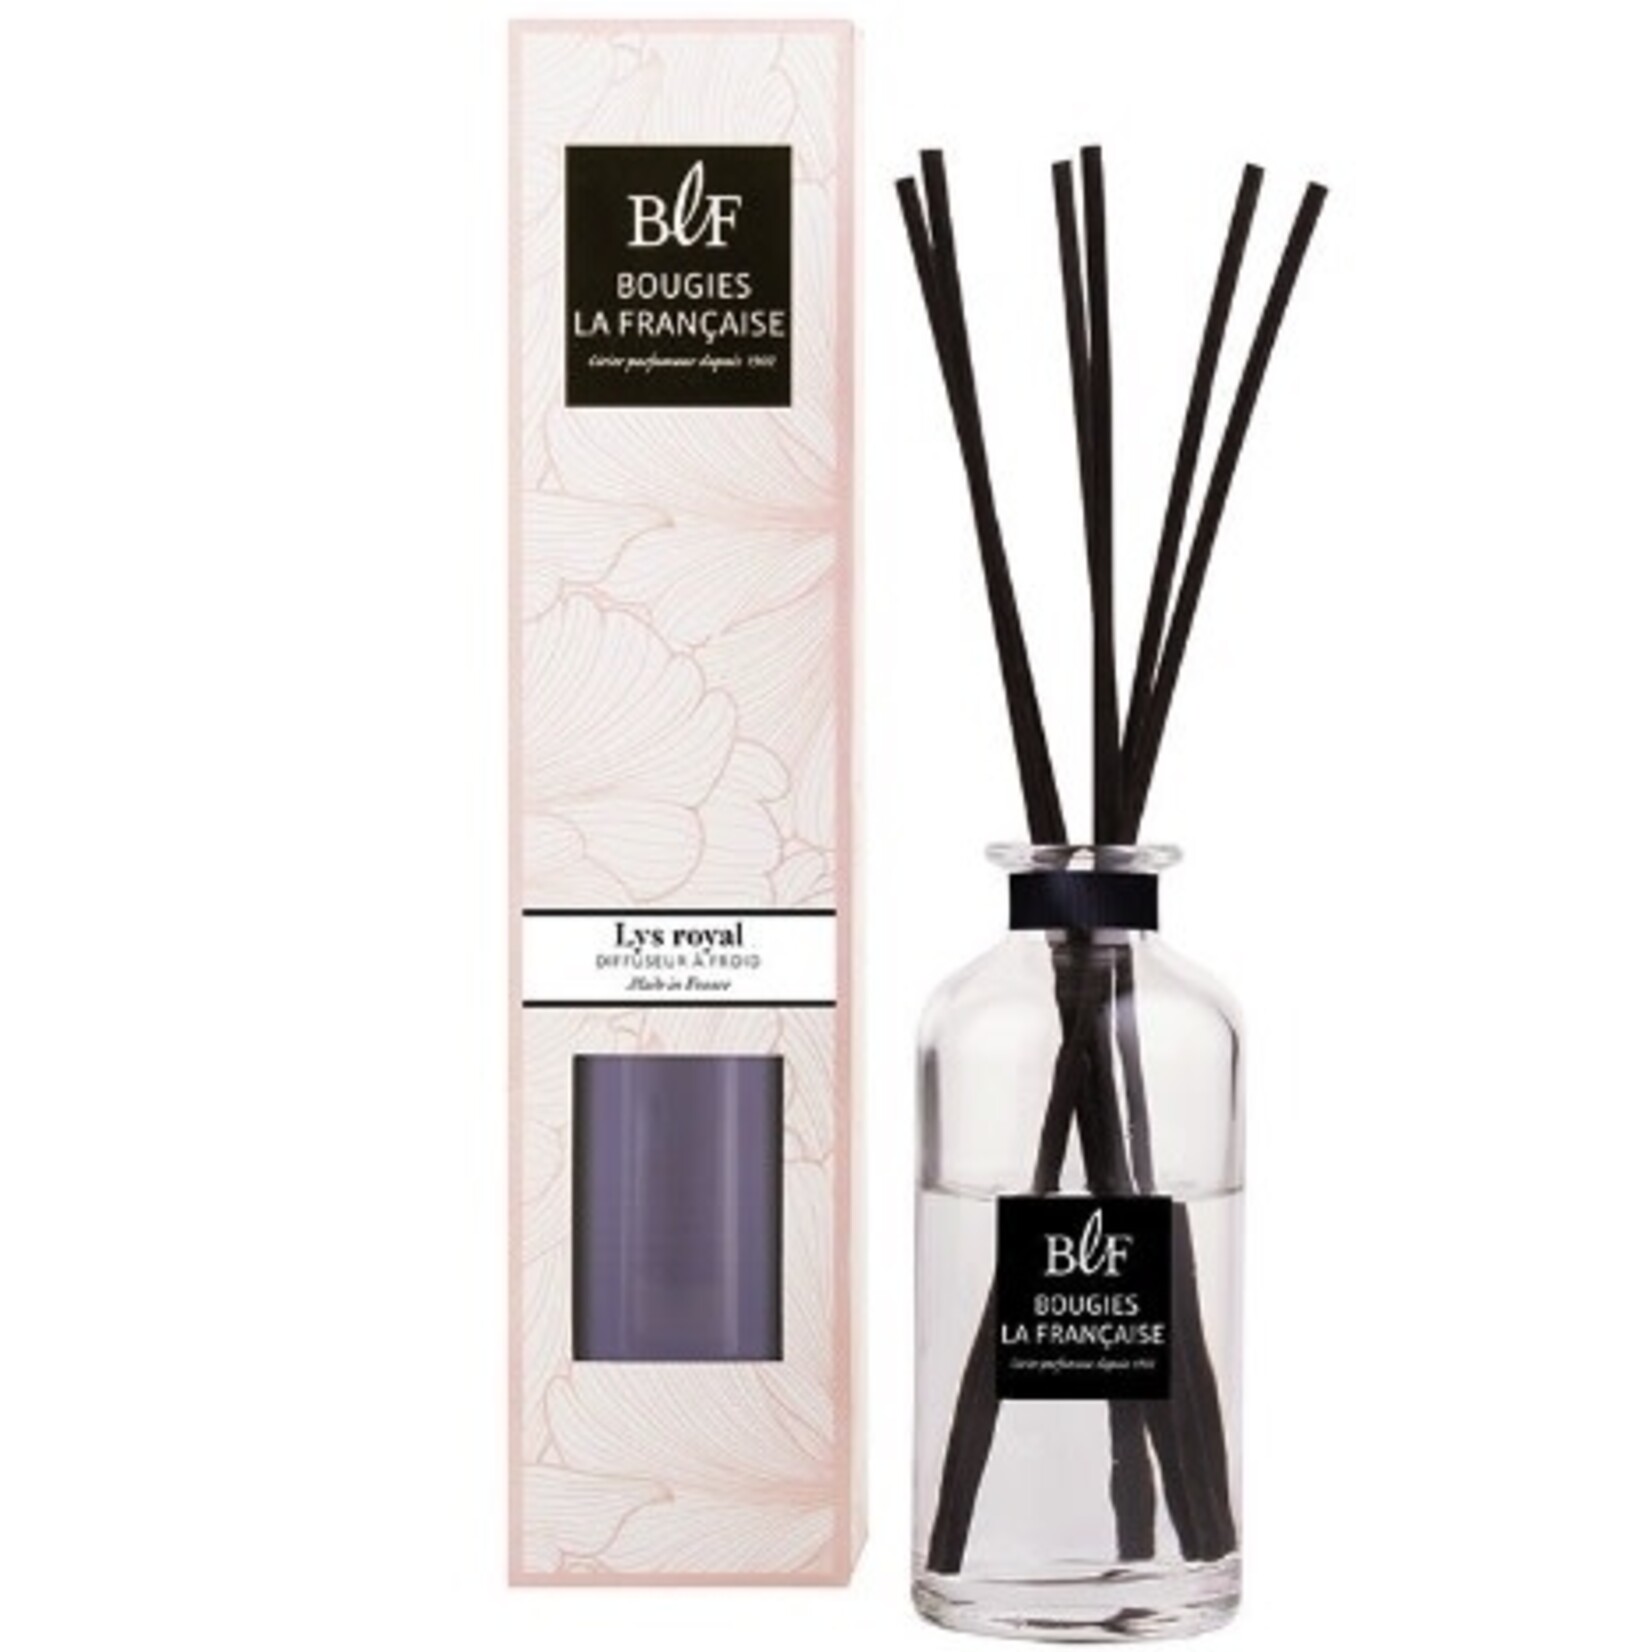 Bougie La Francaise BLF Reed Diffuser Lys Royal